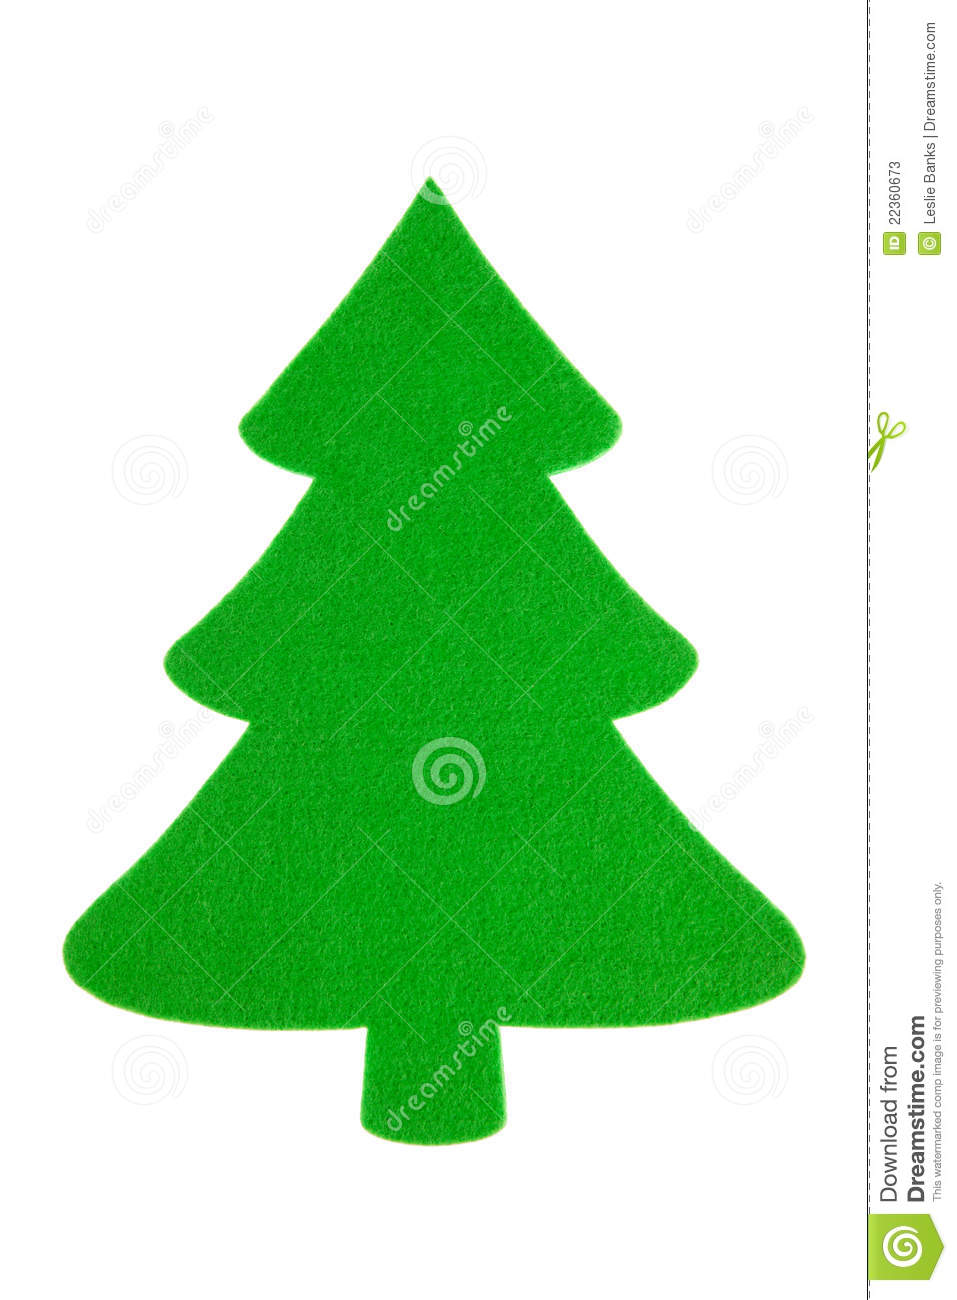 Plain Green Christmas Tree Cut Out Made Of Felt For Design Element    